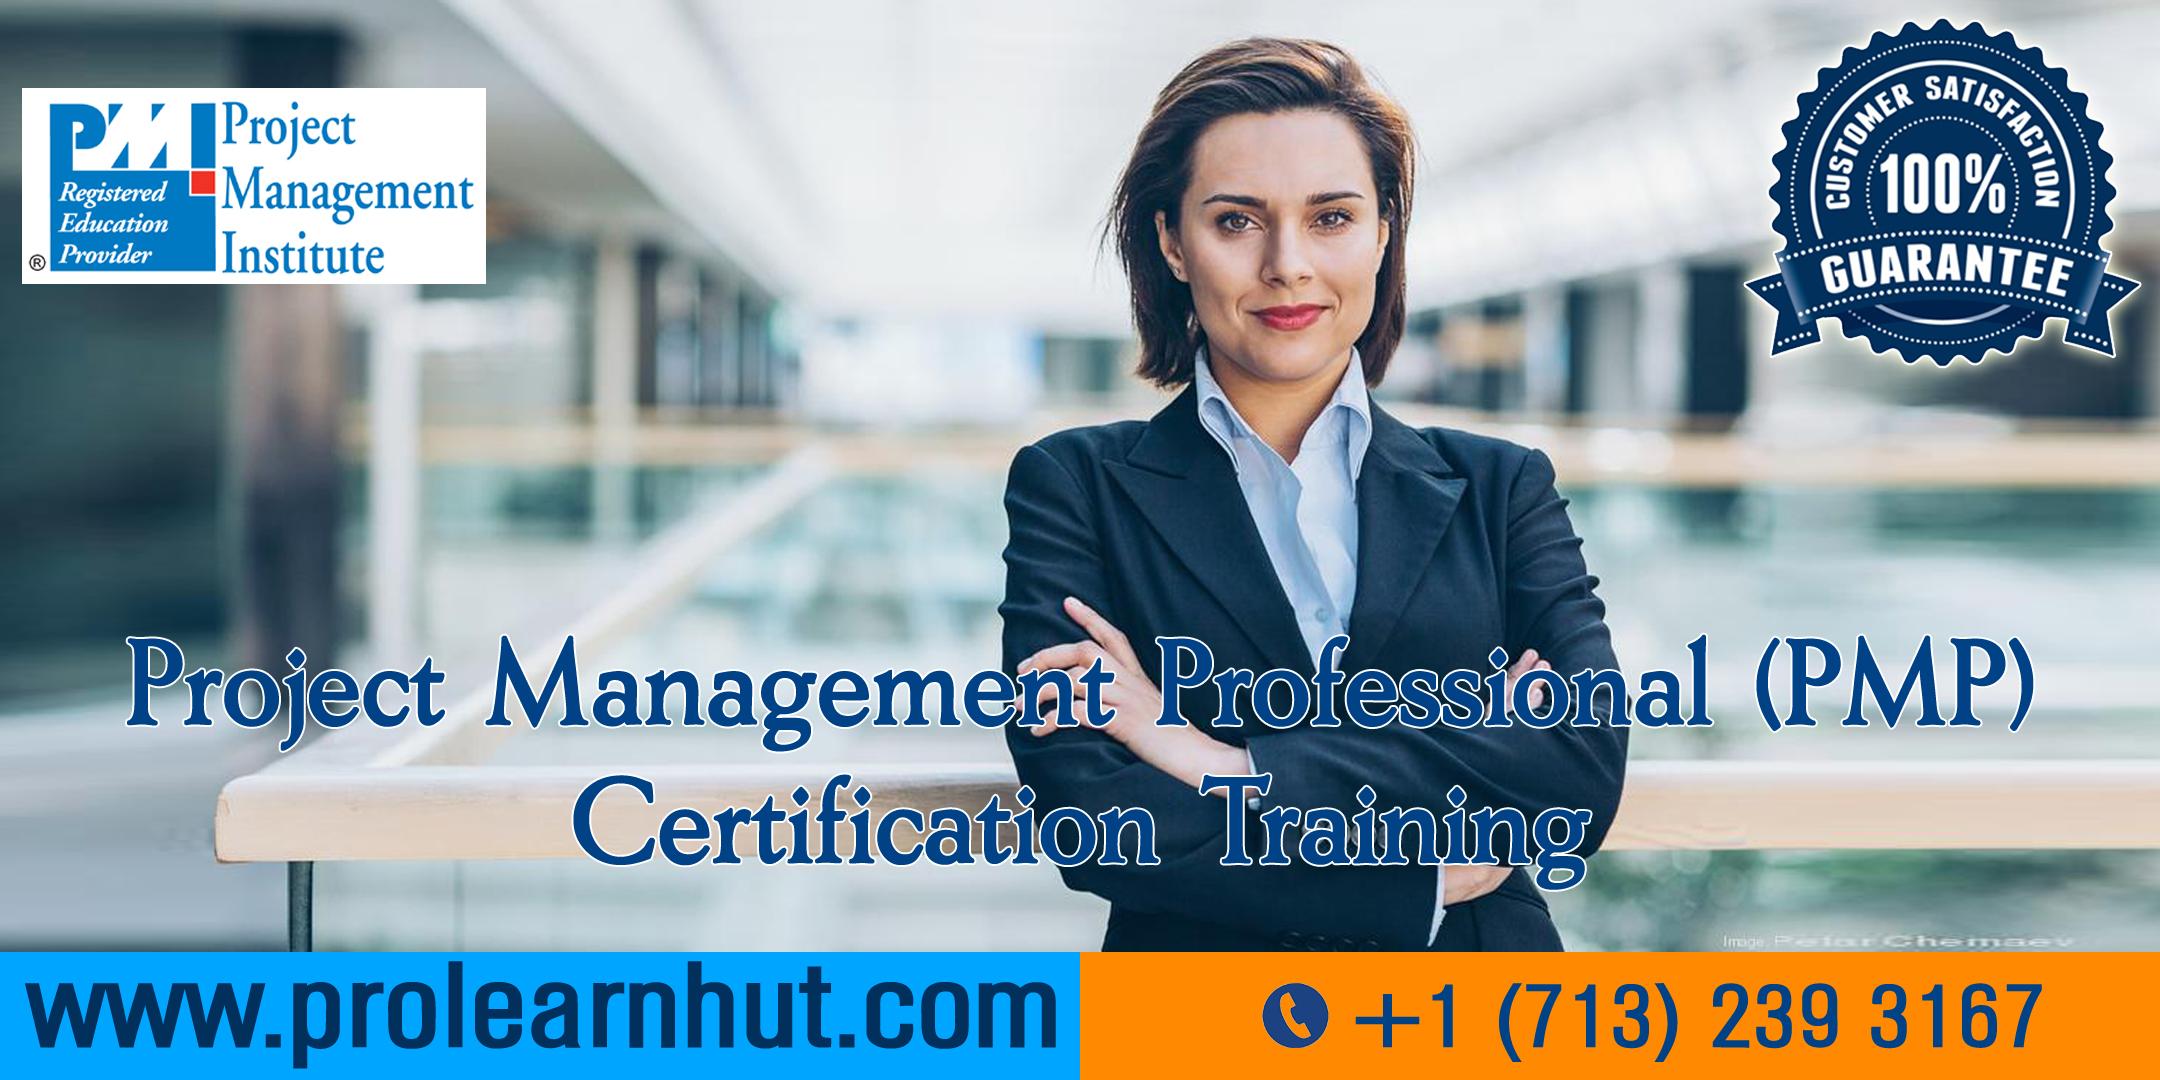 PMP Certification | Project Management Certification| PMP Training in Cambridge, MA | ProLearnHut